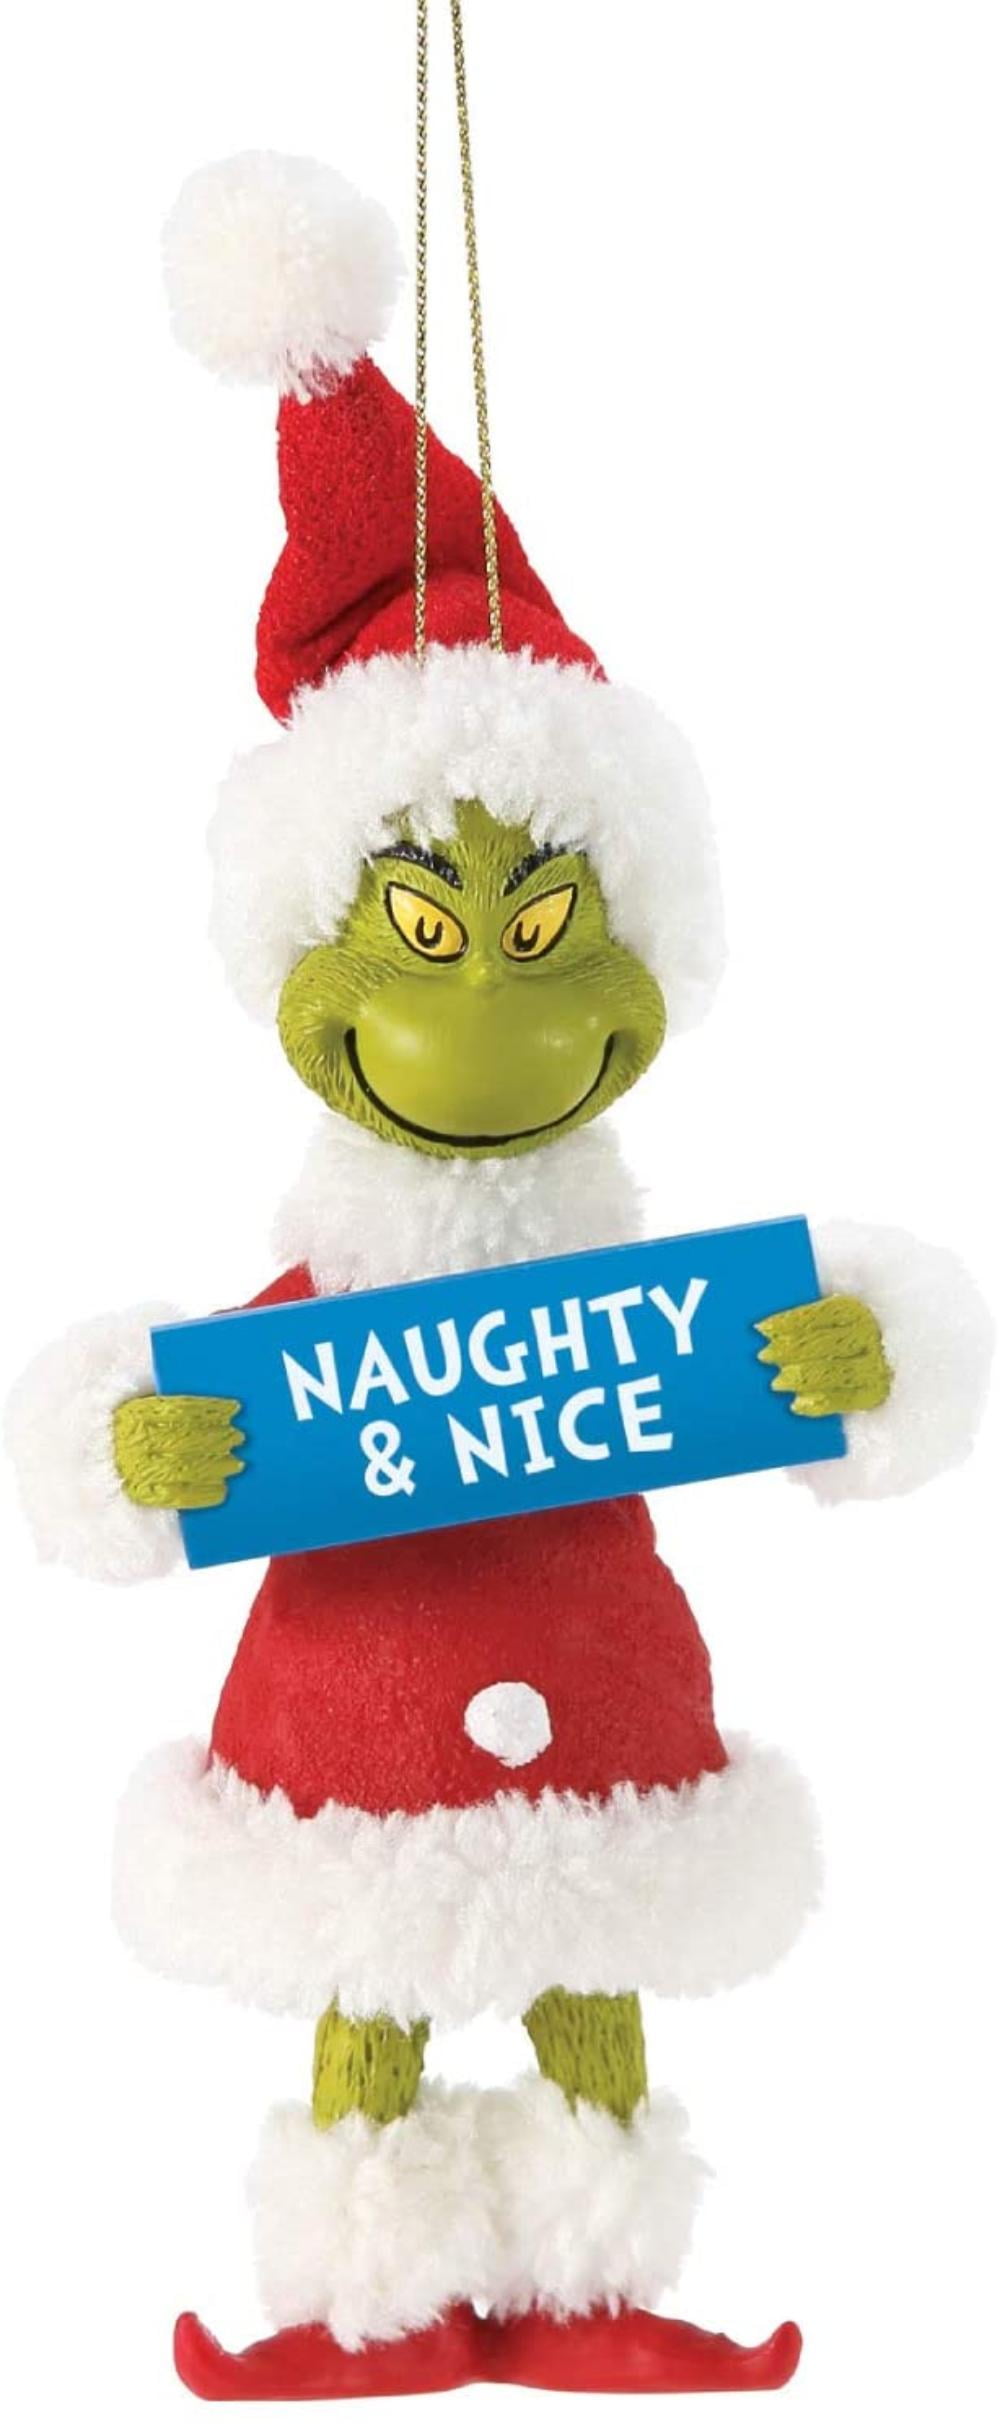 Multicolor Seuss How The Grinch Stole Christmas Naughty and Nice Hanging Ornament Department 56 Possible Dreams Dr 5 Inch